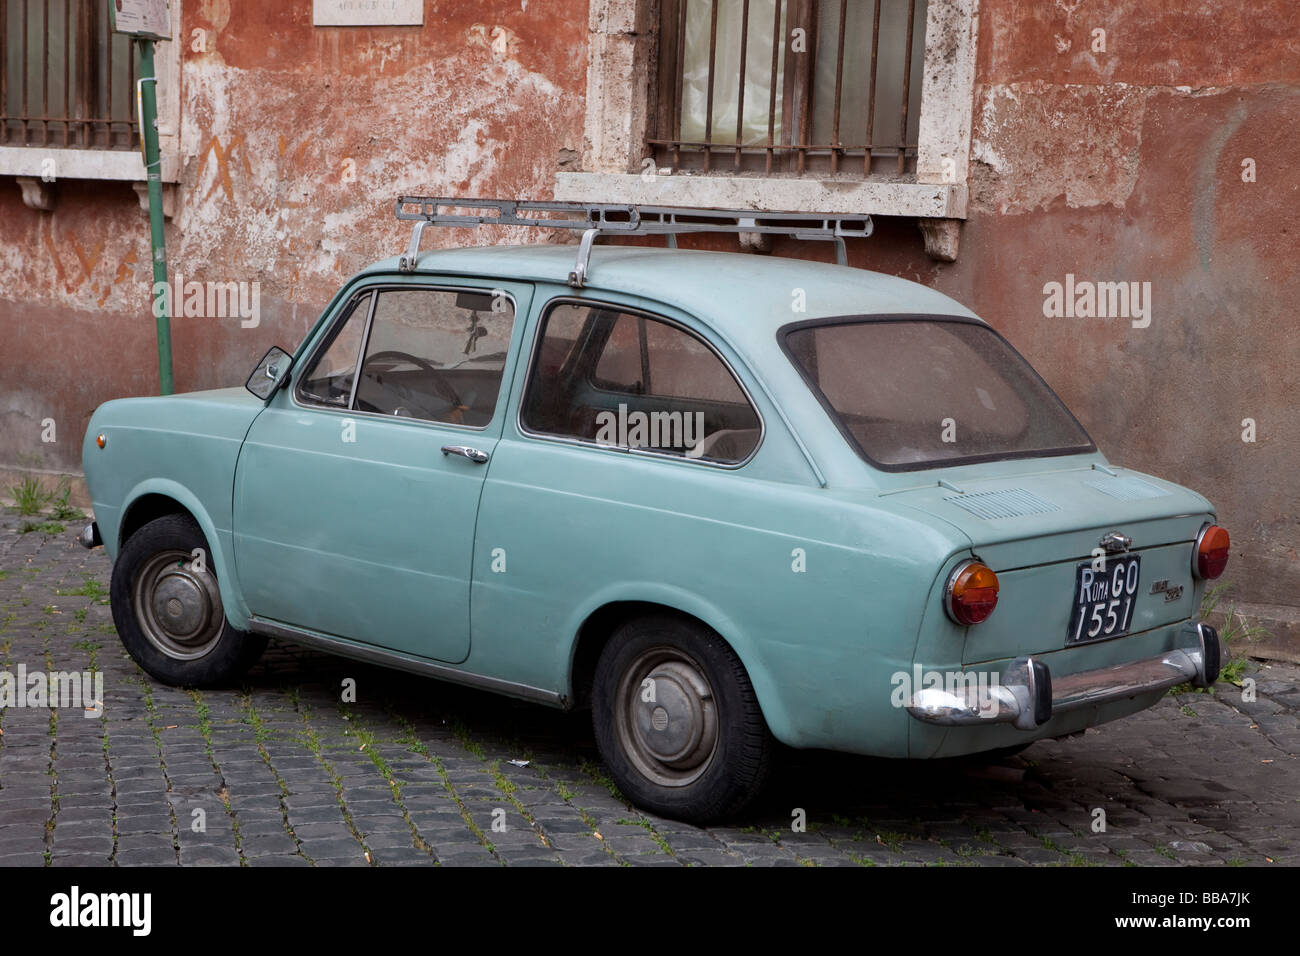 Wall of house with a Fiat 850 in front, Trastevere, Rome, Italy Stock Photo